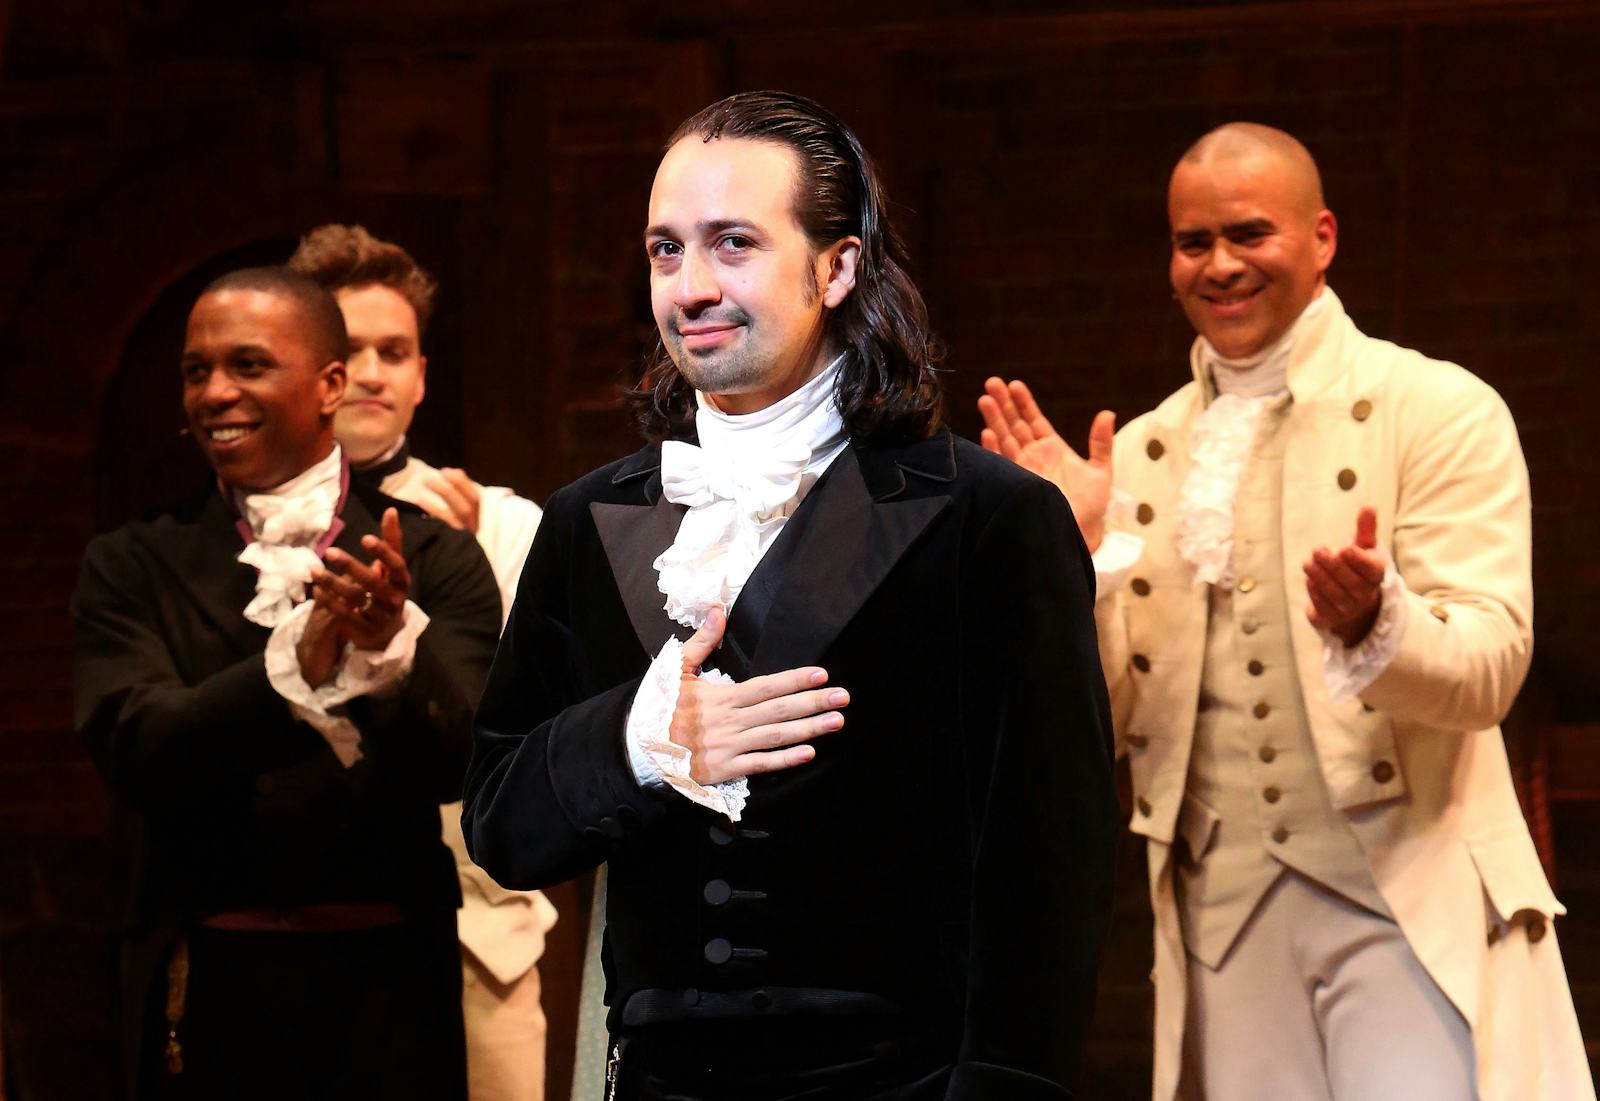 The 'Hamilton' Cast Will LiveTweet The Broadway Show's Disney+ Debut